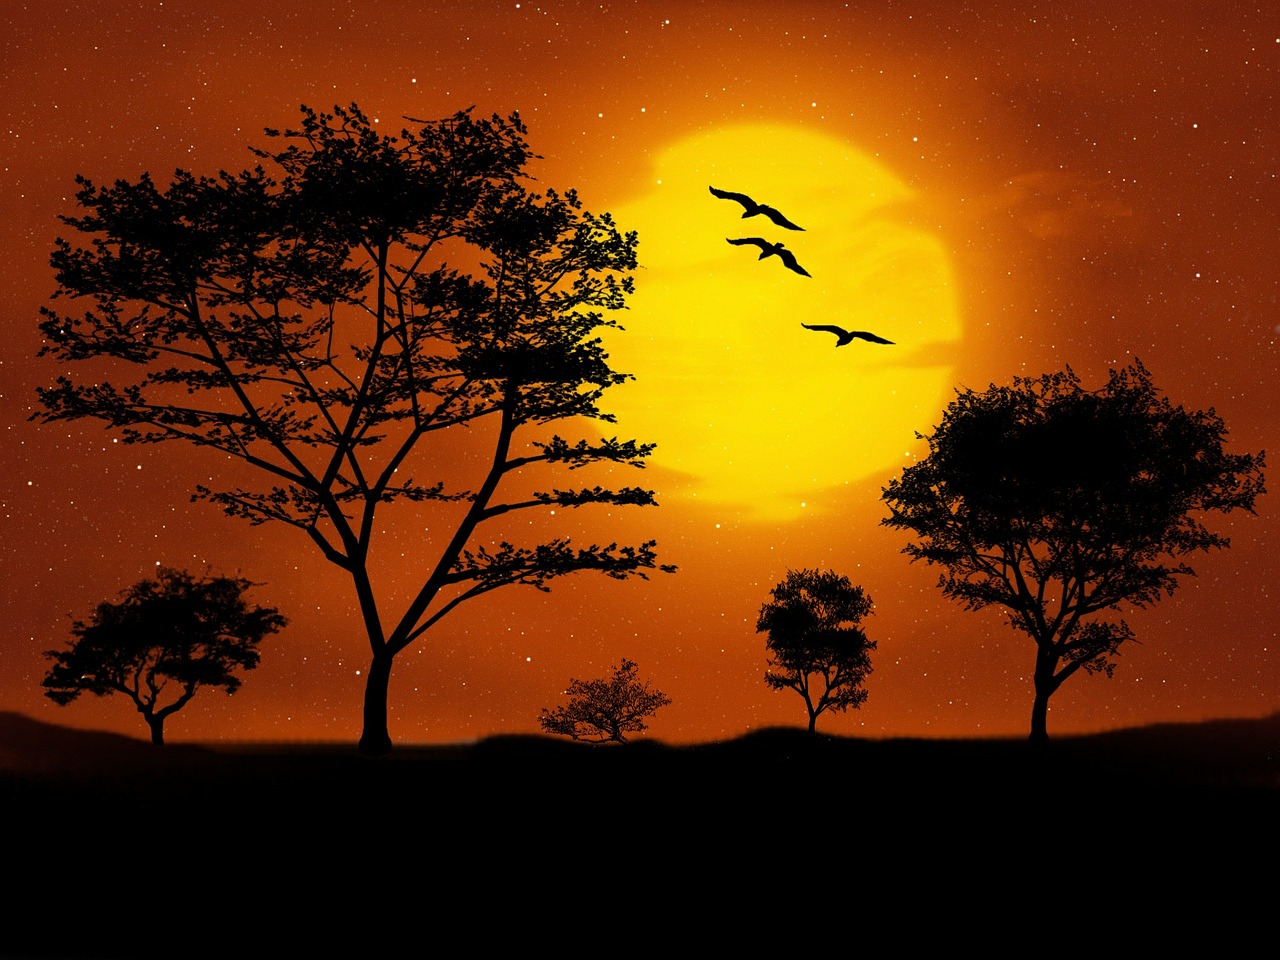 silhouette of birds and trees in orange moonlight